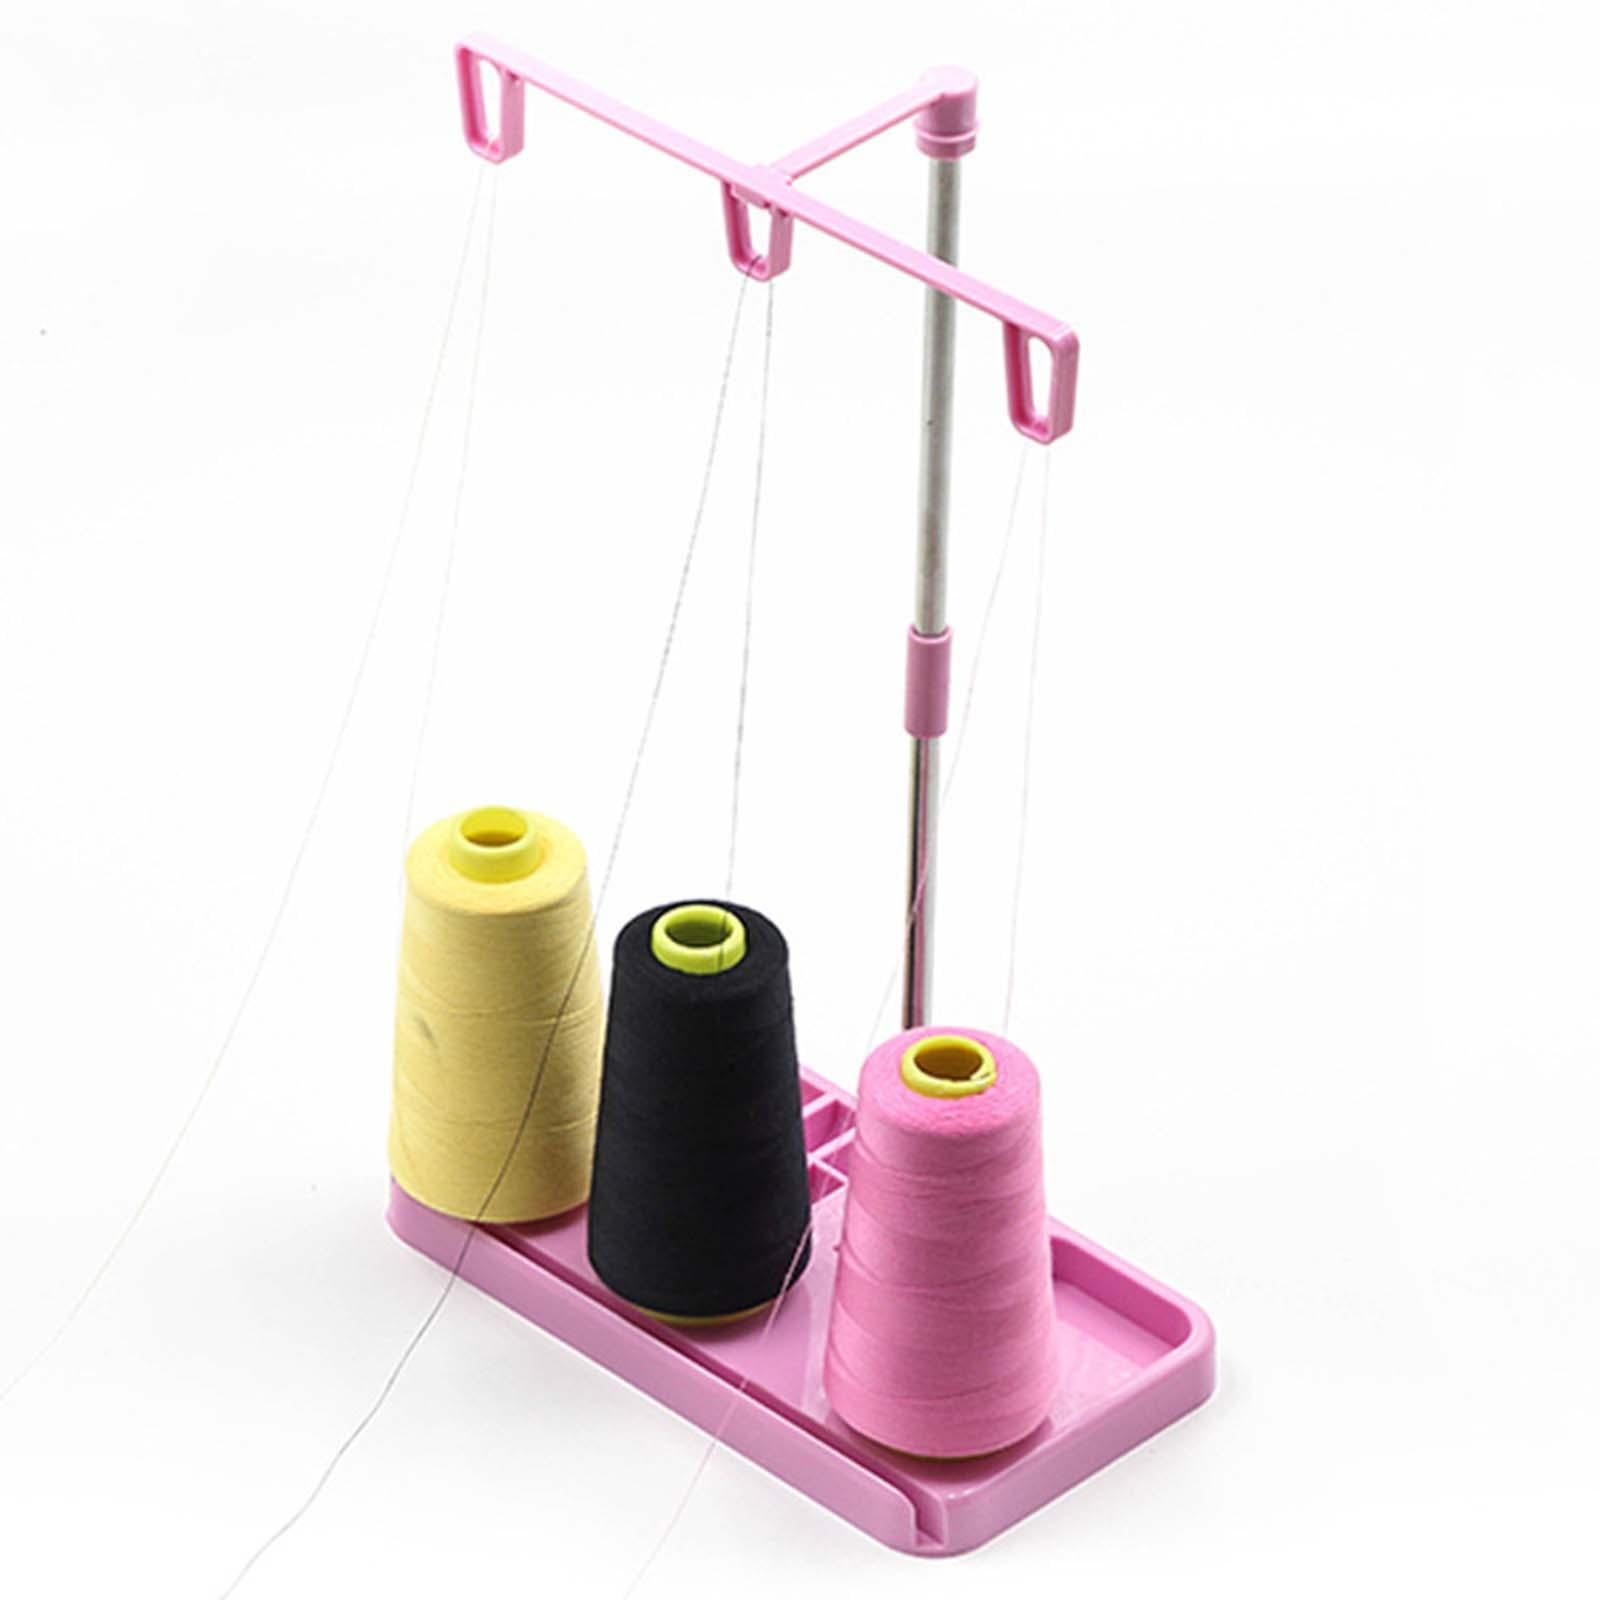 YEQIN Thread Spool Holder Stand- 3 Spools Holder for Domestic (Home-Base)  Embroidery and Sewing Machines - Four Colors for Choices (Pink)